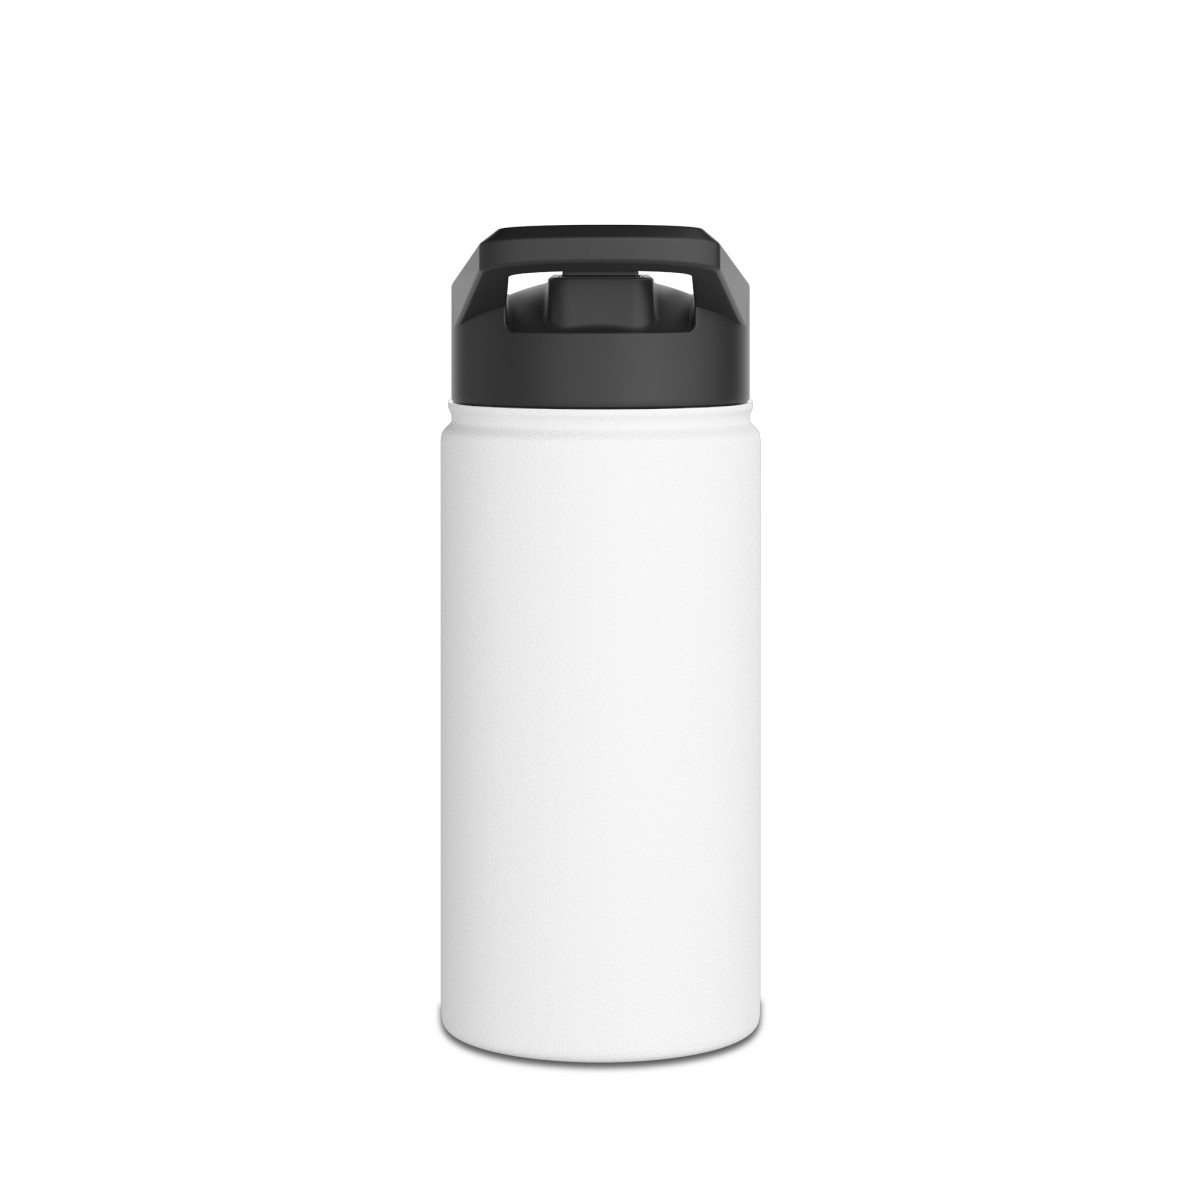 Stainless Steel Water Bottle, Standard Lid - Obesity Is A Disease product thumbnail image